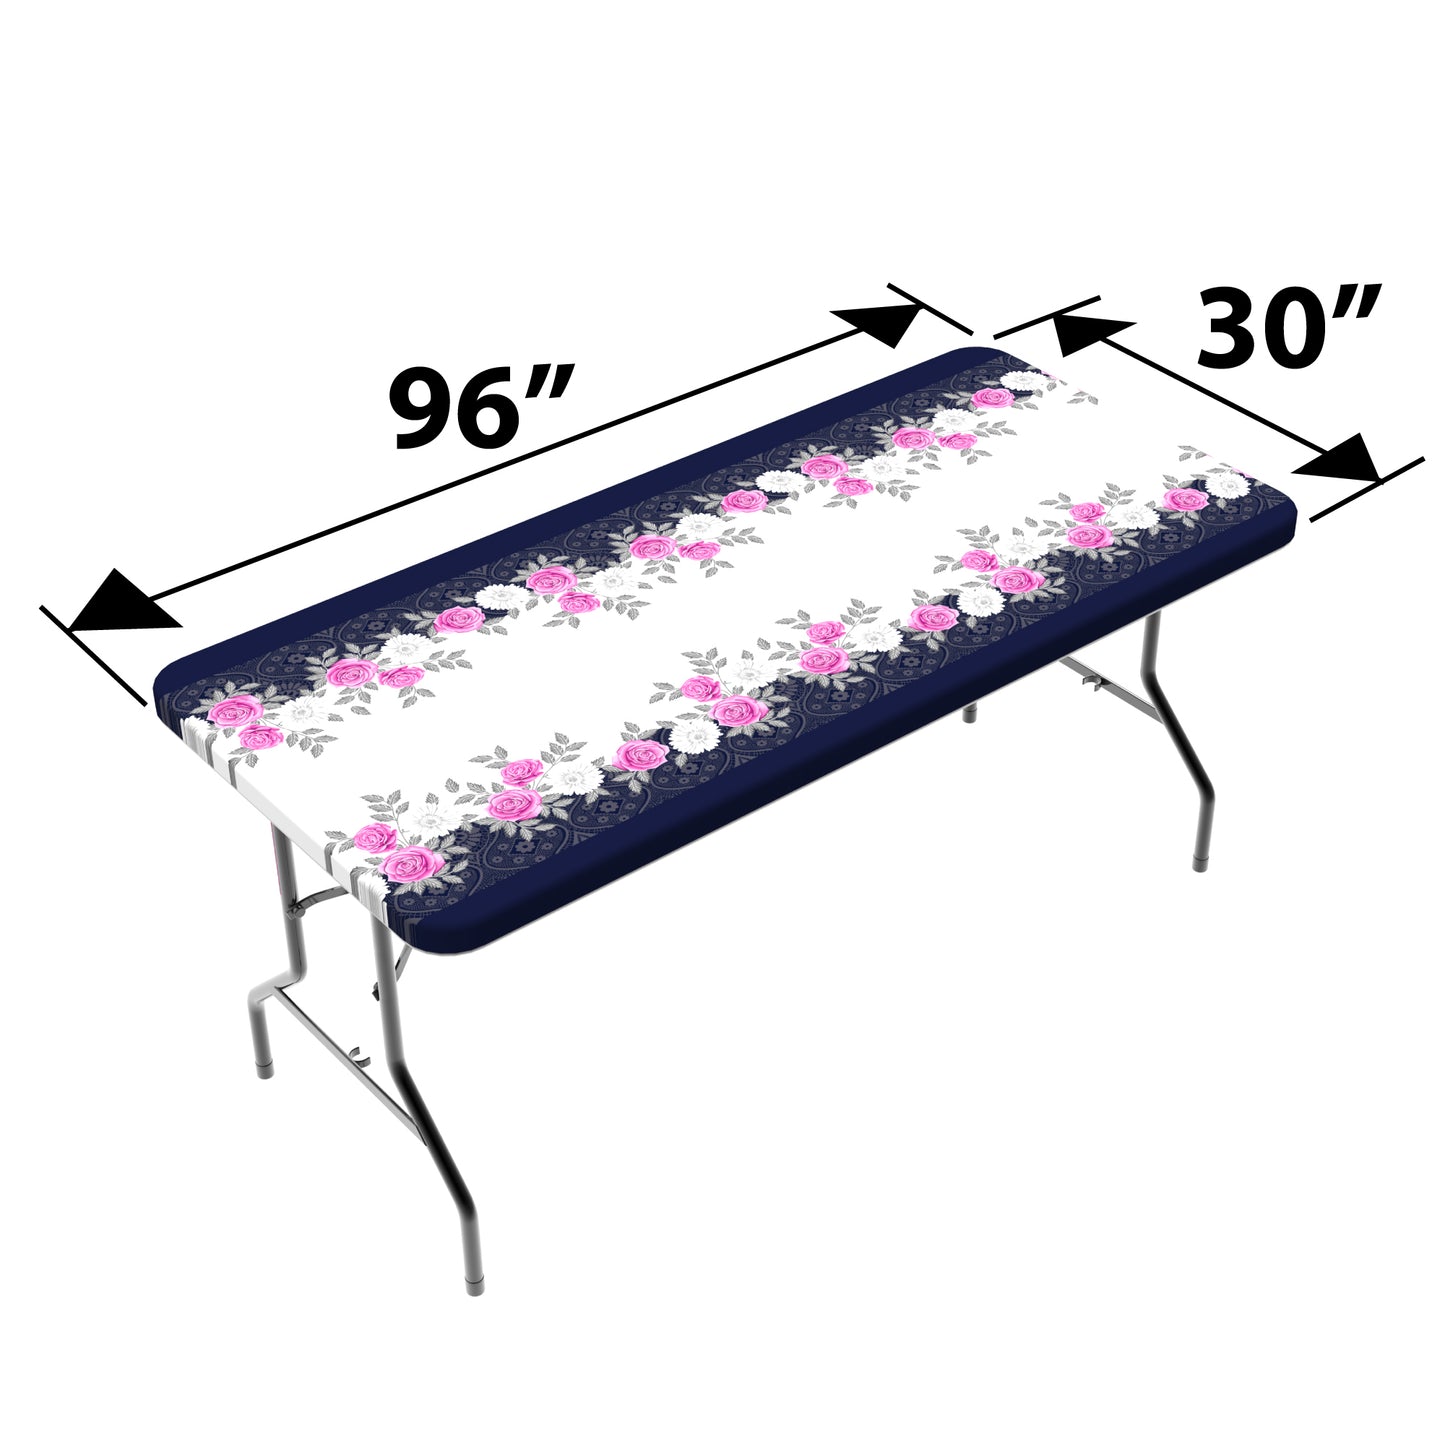 A closeup of a TableCloth PLUS 96" Roses Fitted Polyester Tablecloth for 8' Folding Tables gripping a folding table around the entire table edge